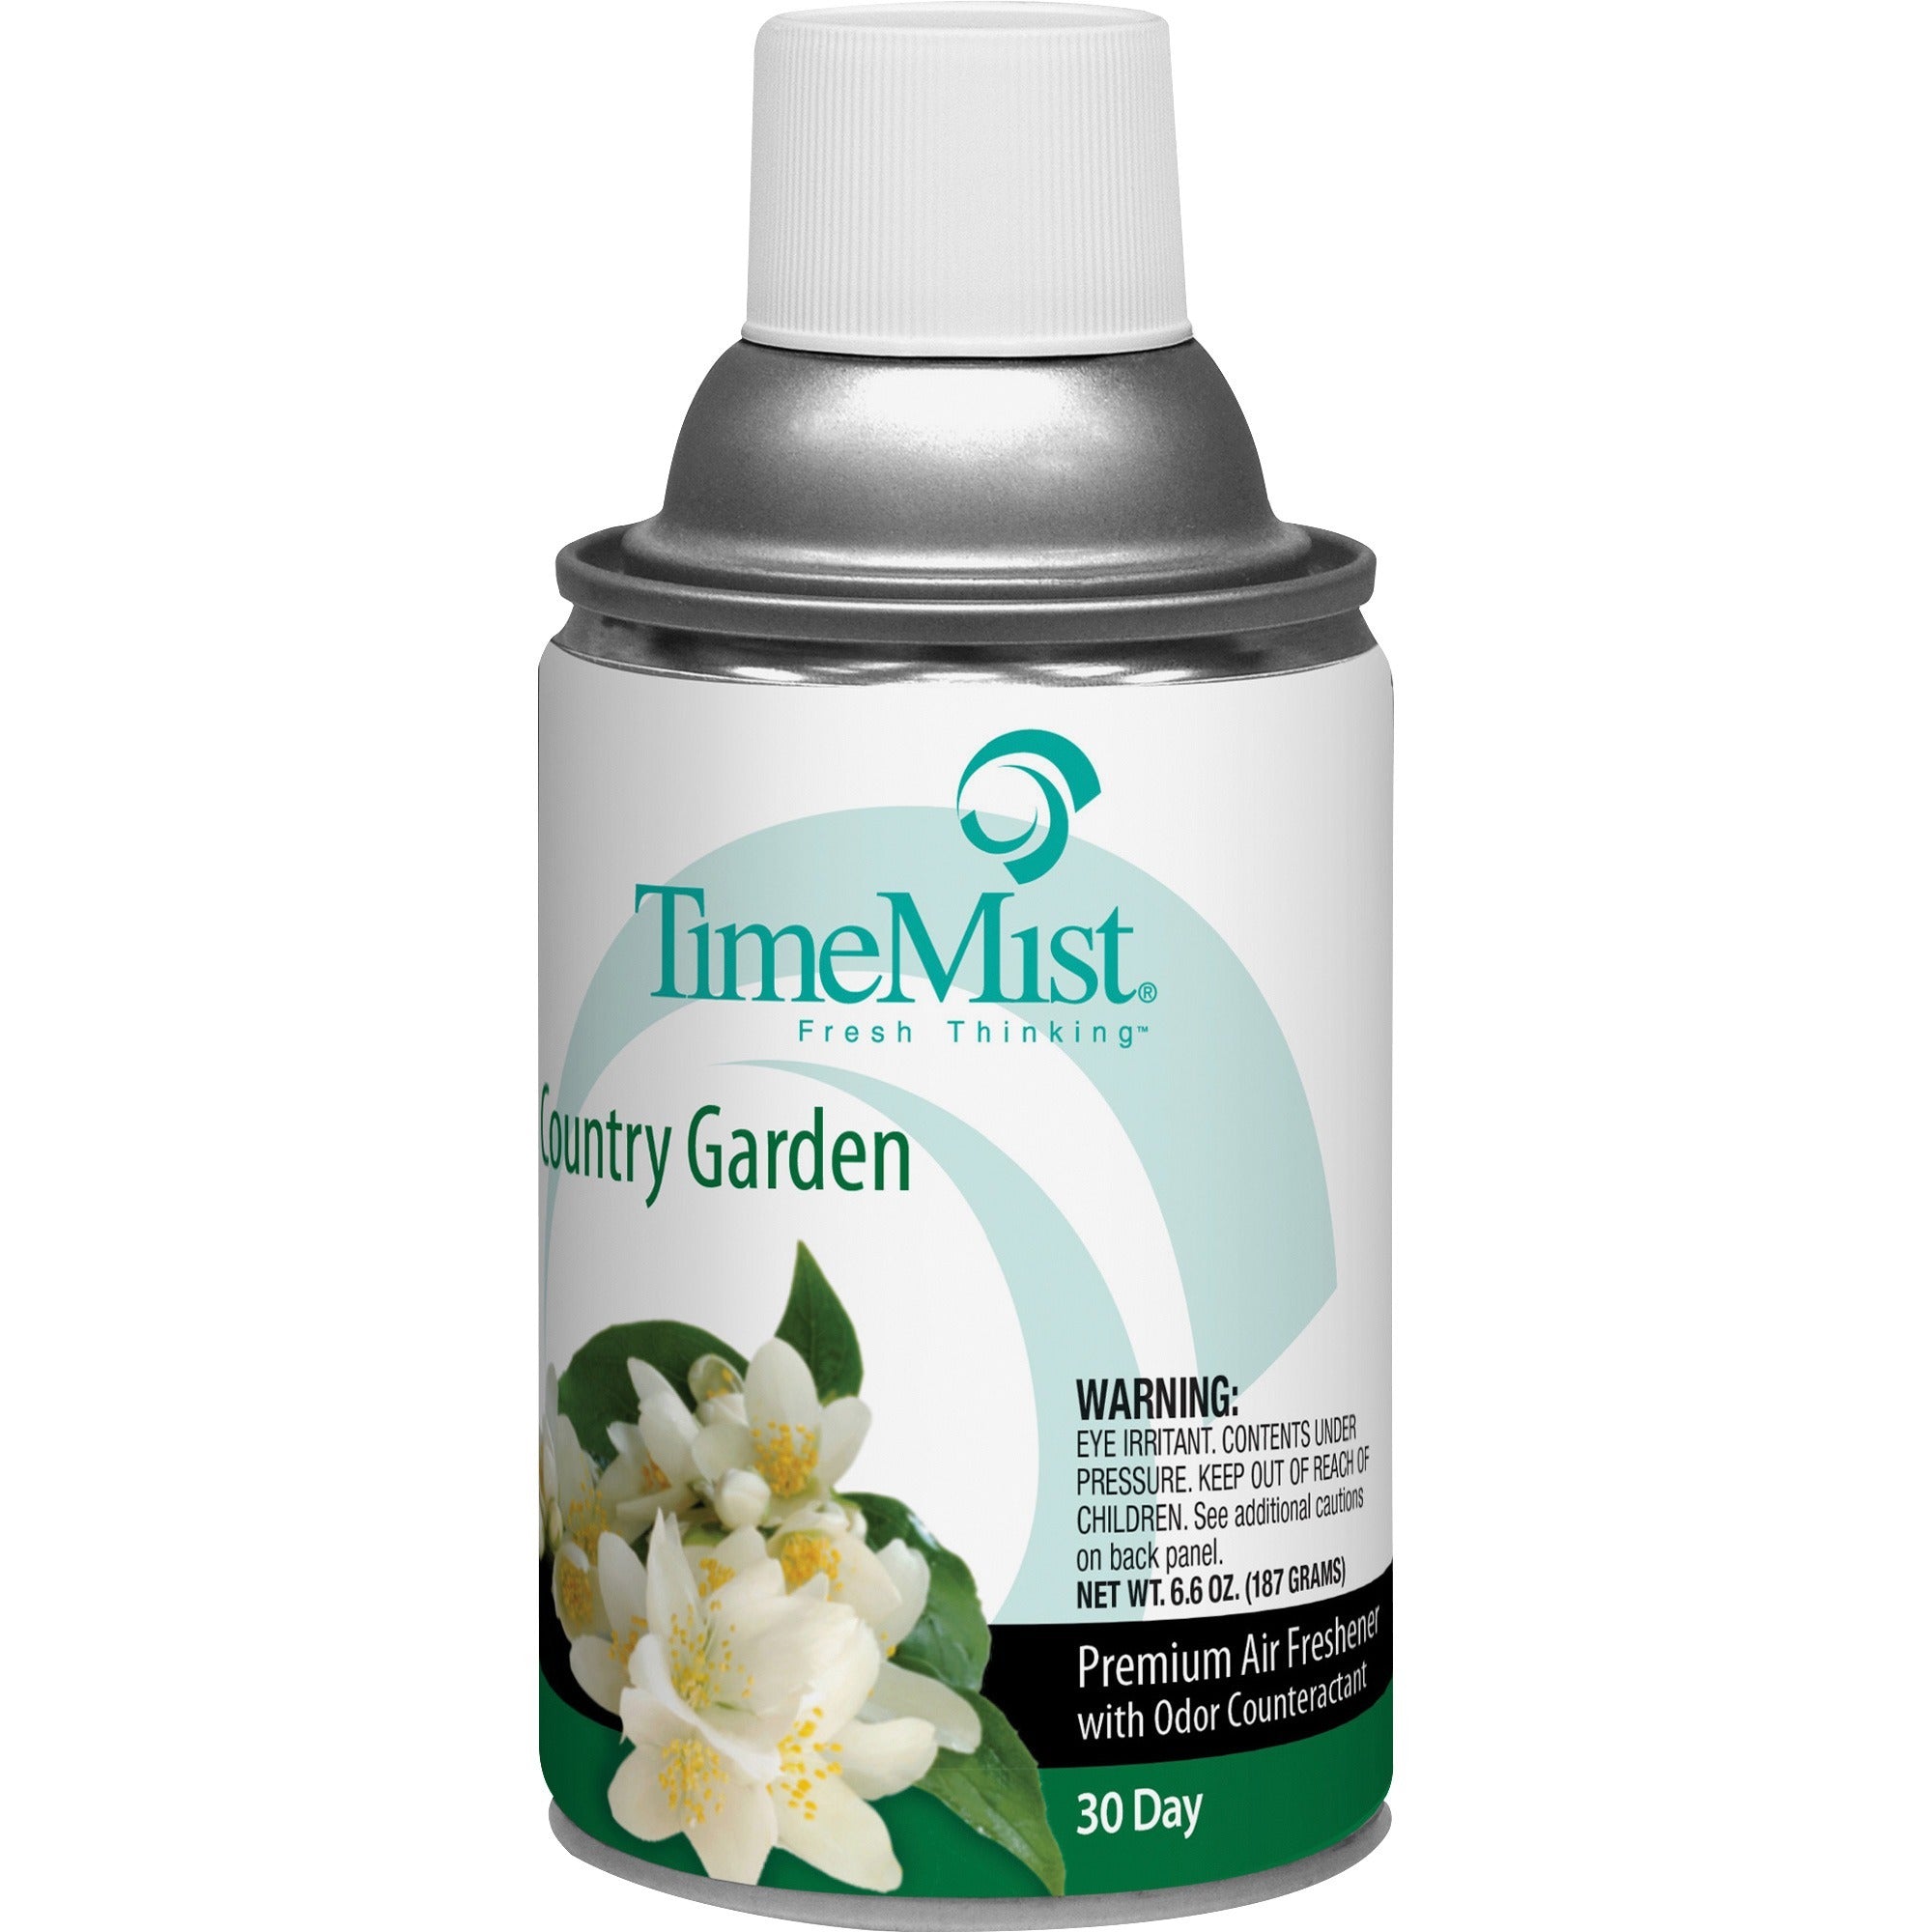 timemist-metered-30-day-country-garden-scent-refill-spray-6000-ft-66-fl-oz-02-quart-country-garden-30-day-12-carton-long-lasting-odor-neutralizer_tms1042786ct - 2